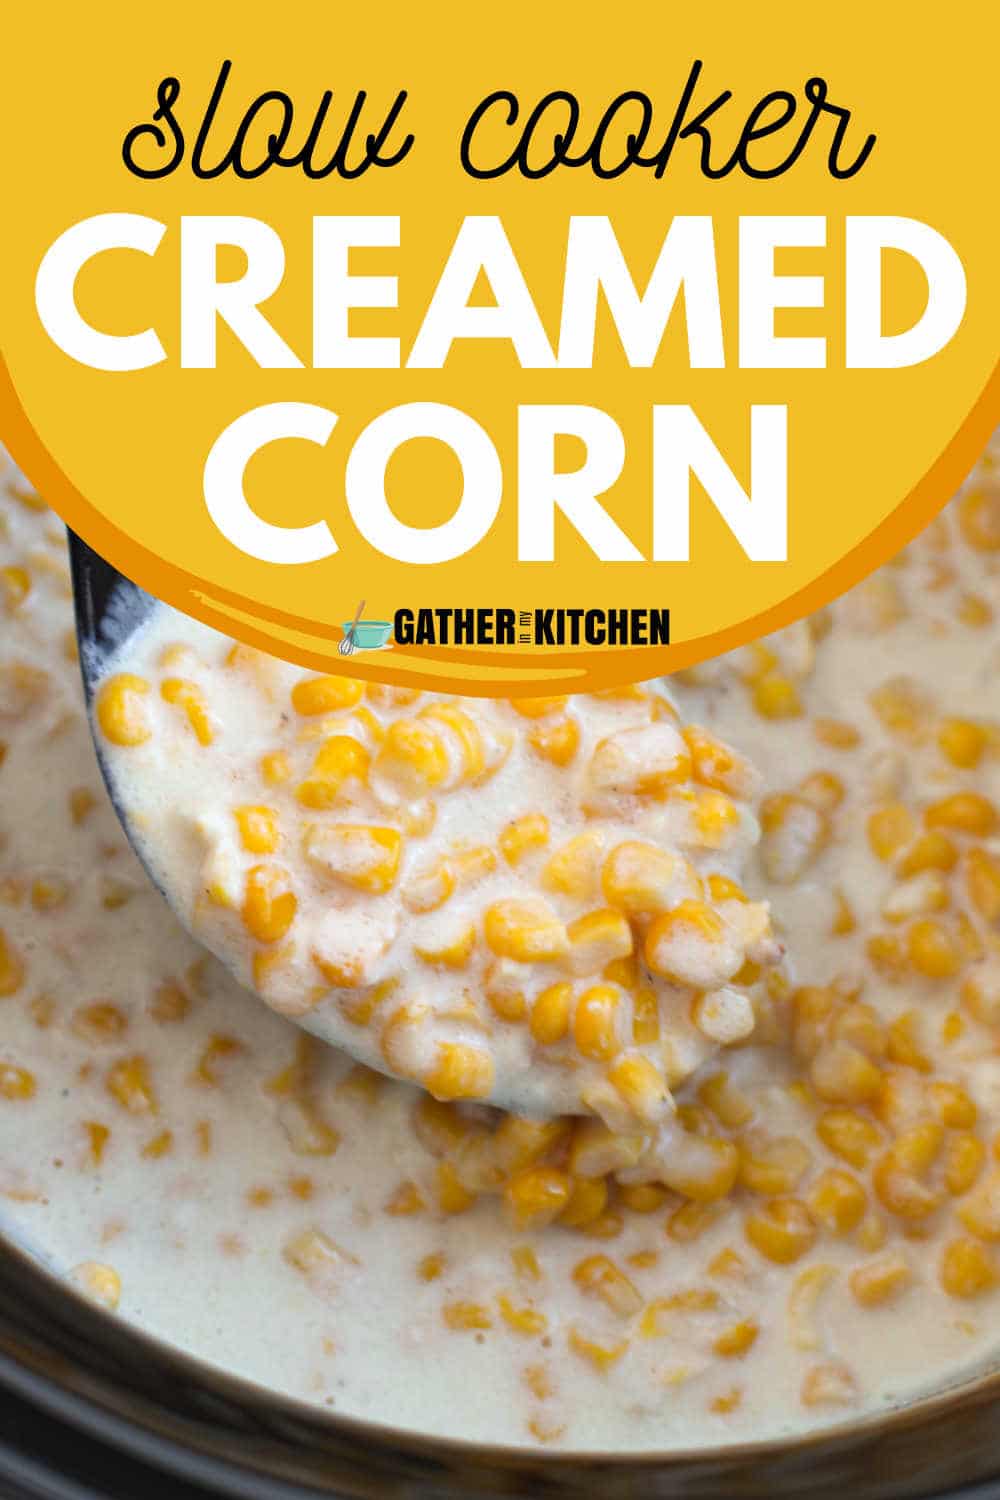 pin image: creamed corn with the words "slow cooker creamed corn" on top.